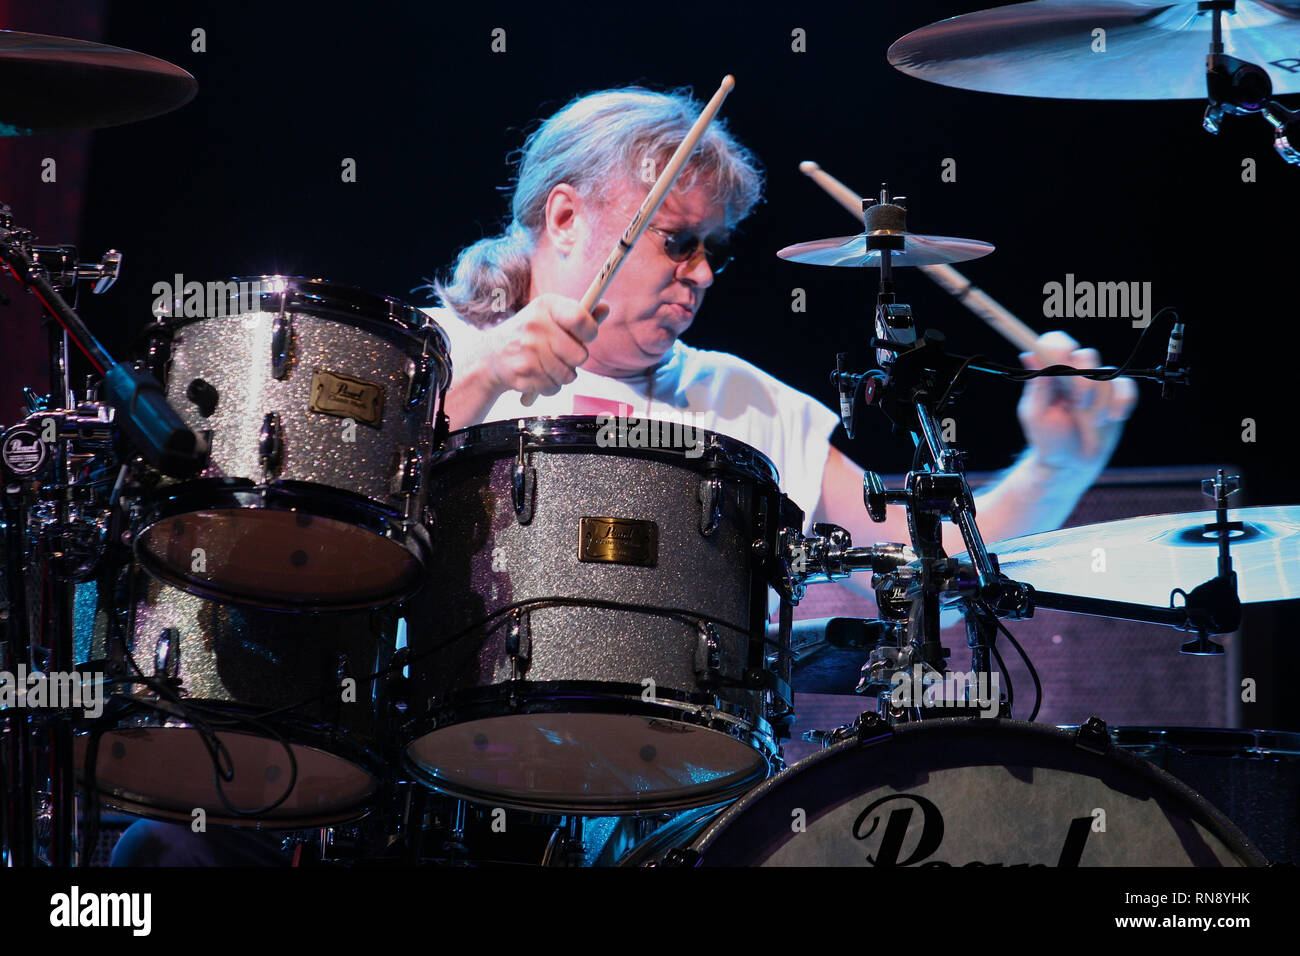 Deep Purple drummer Ian Paice is shown performing on stage during a 'live' concert appearance. Stock Photo